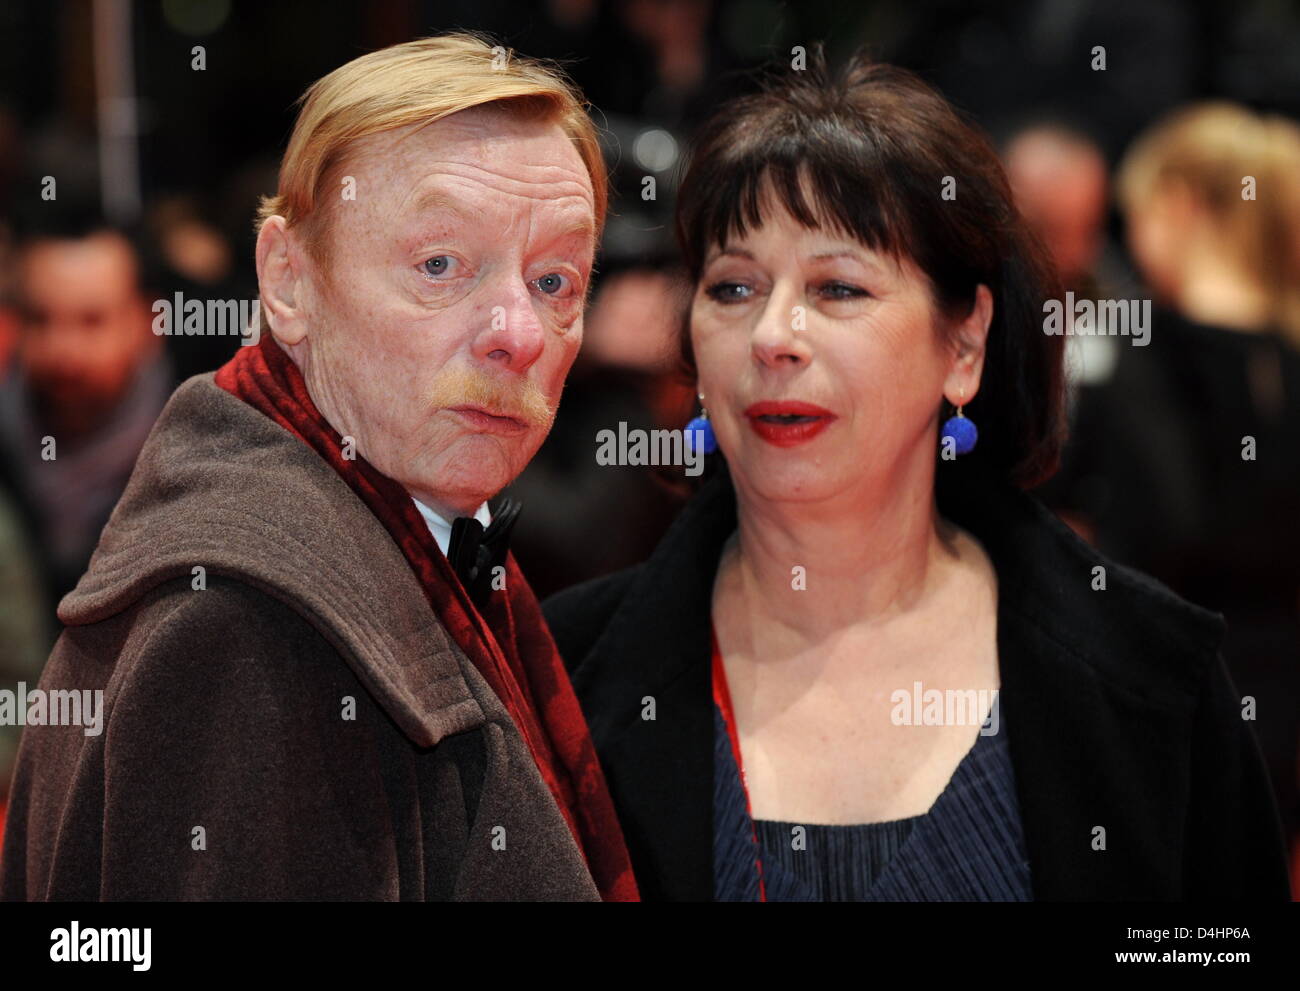 German actor Otto Sander and his wife, actress Monika Hansen, arrive at the premiere of the film ?The International? at the 59th Berlin International Film Festival, also referred to as Berlinale, in Berlin, Germany, 05 February 2009. The film opens the 59th Berlinale at Potsdamer Platz. Within the scope of the official competition, 18 movies will compete for the golden and silver b Stock Photo